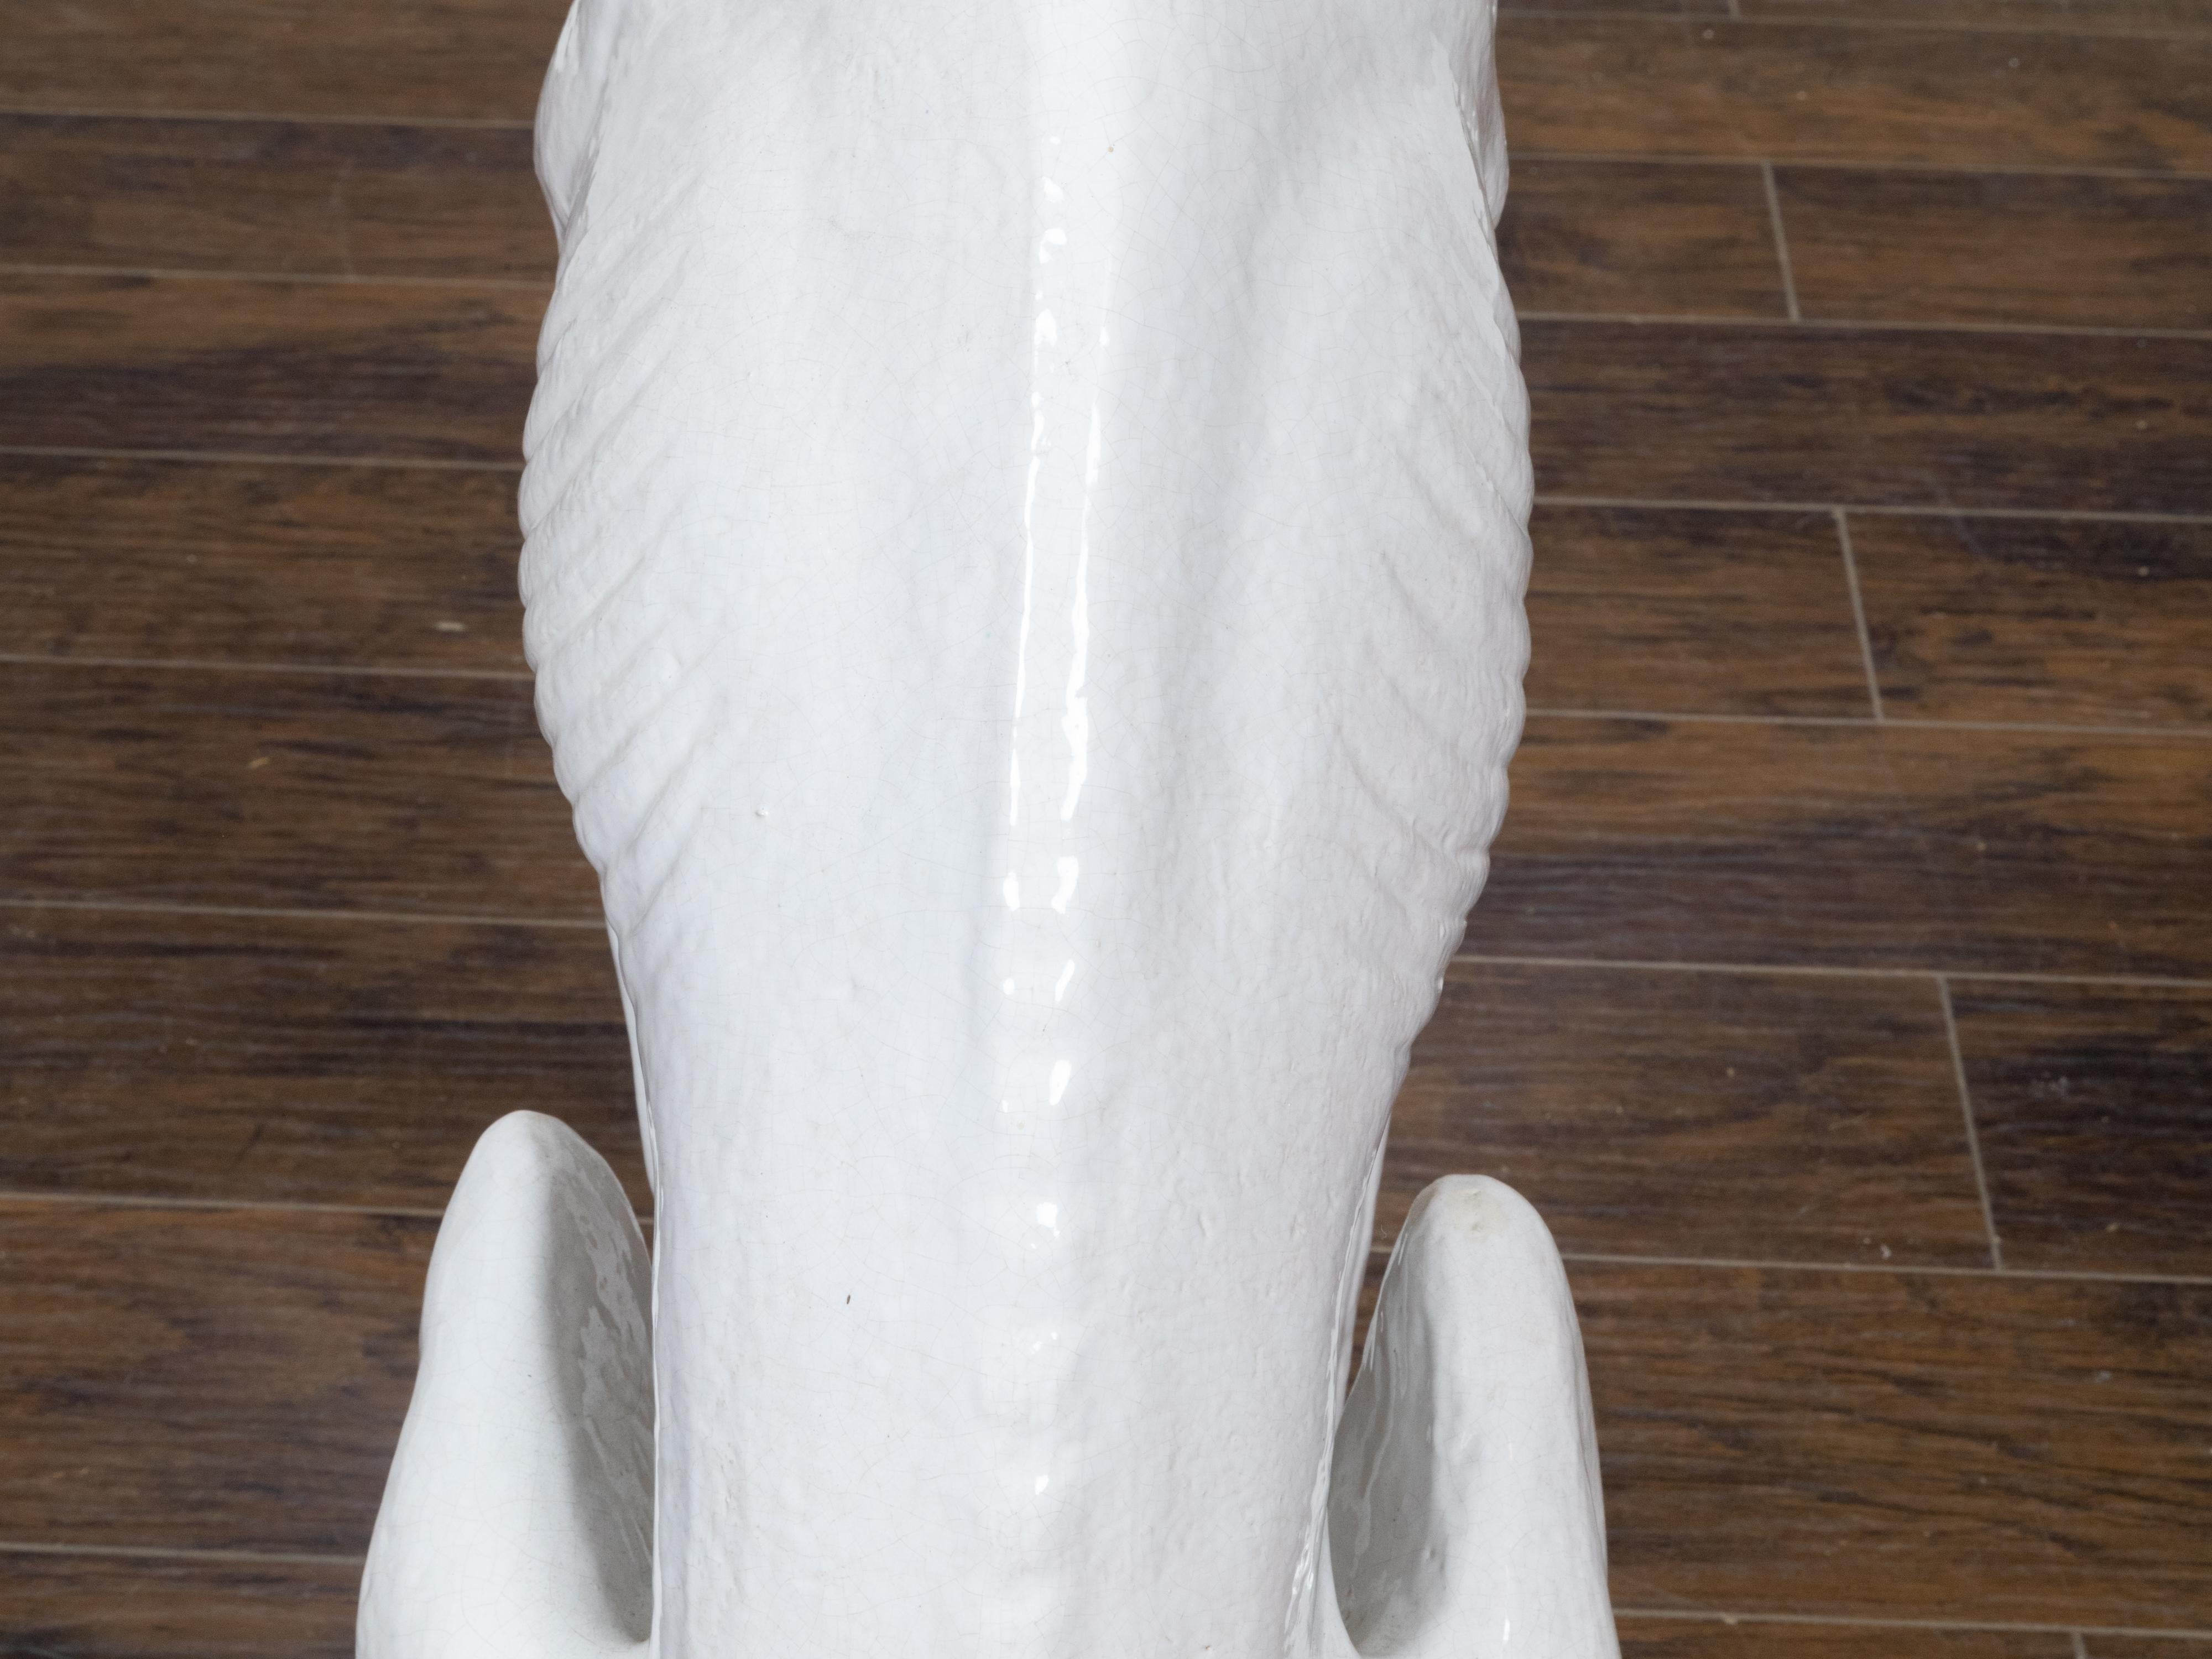 Midcentury Italian White Porcelain Sculpture of a Calm, Sitting Greyhound For Sale 5